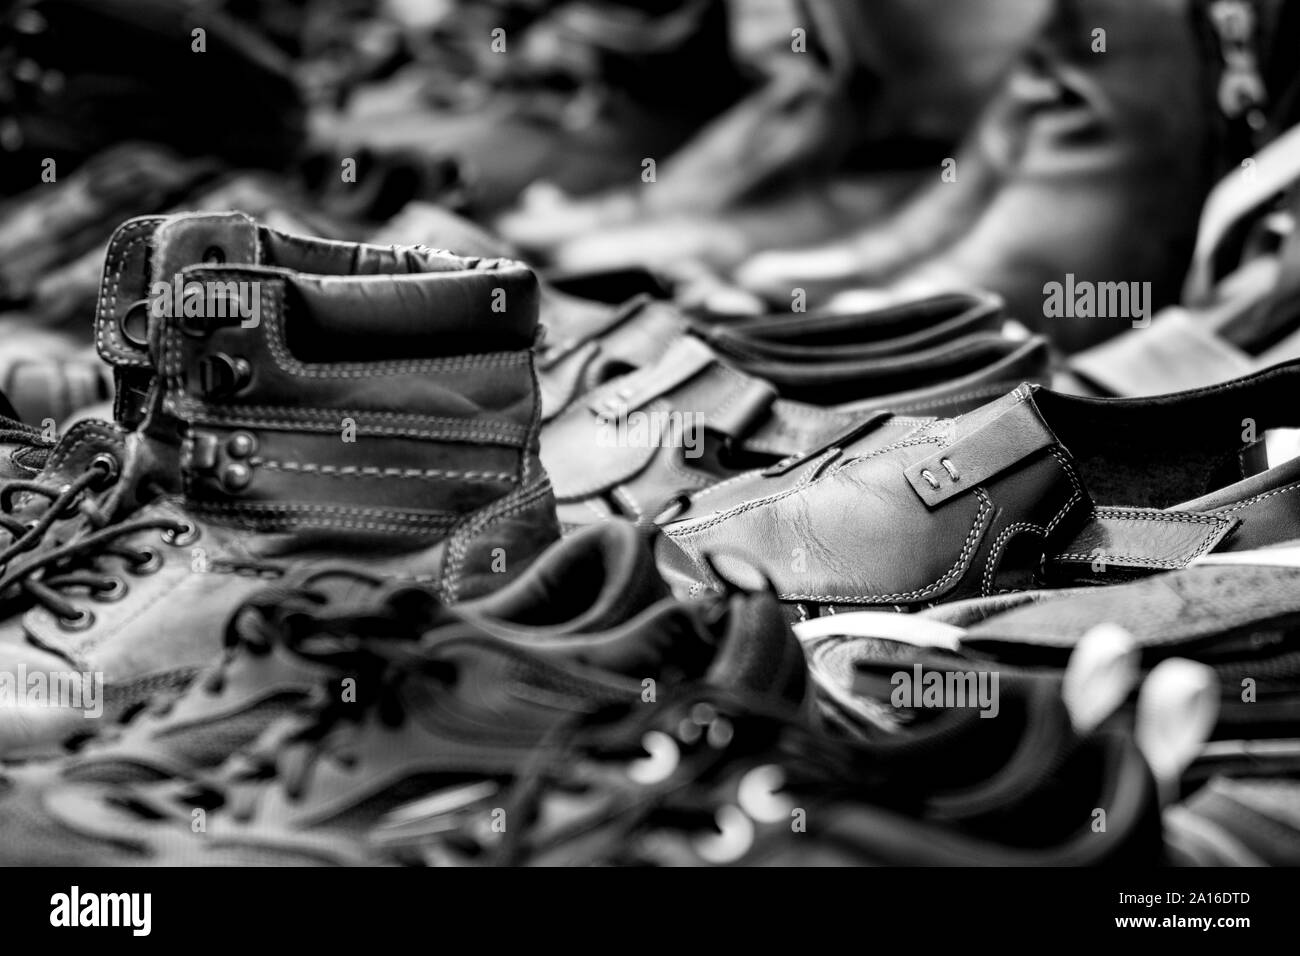 A black and white photo of a collection of aligned pairs of  worn shoes; blurred  front and background. Stock Photo